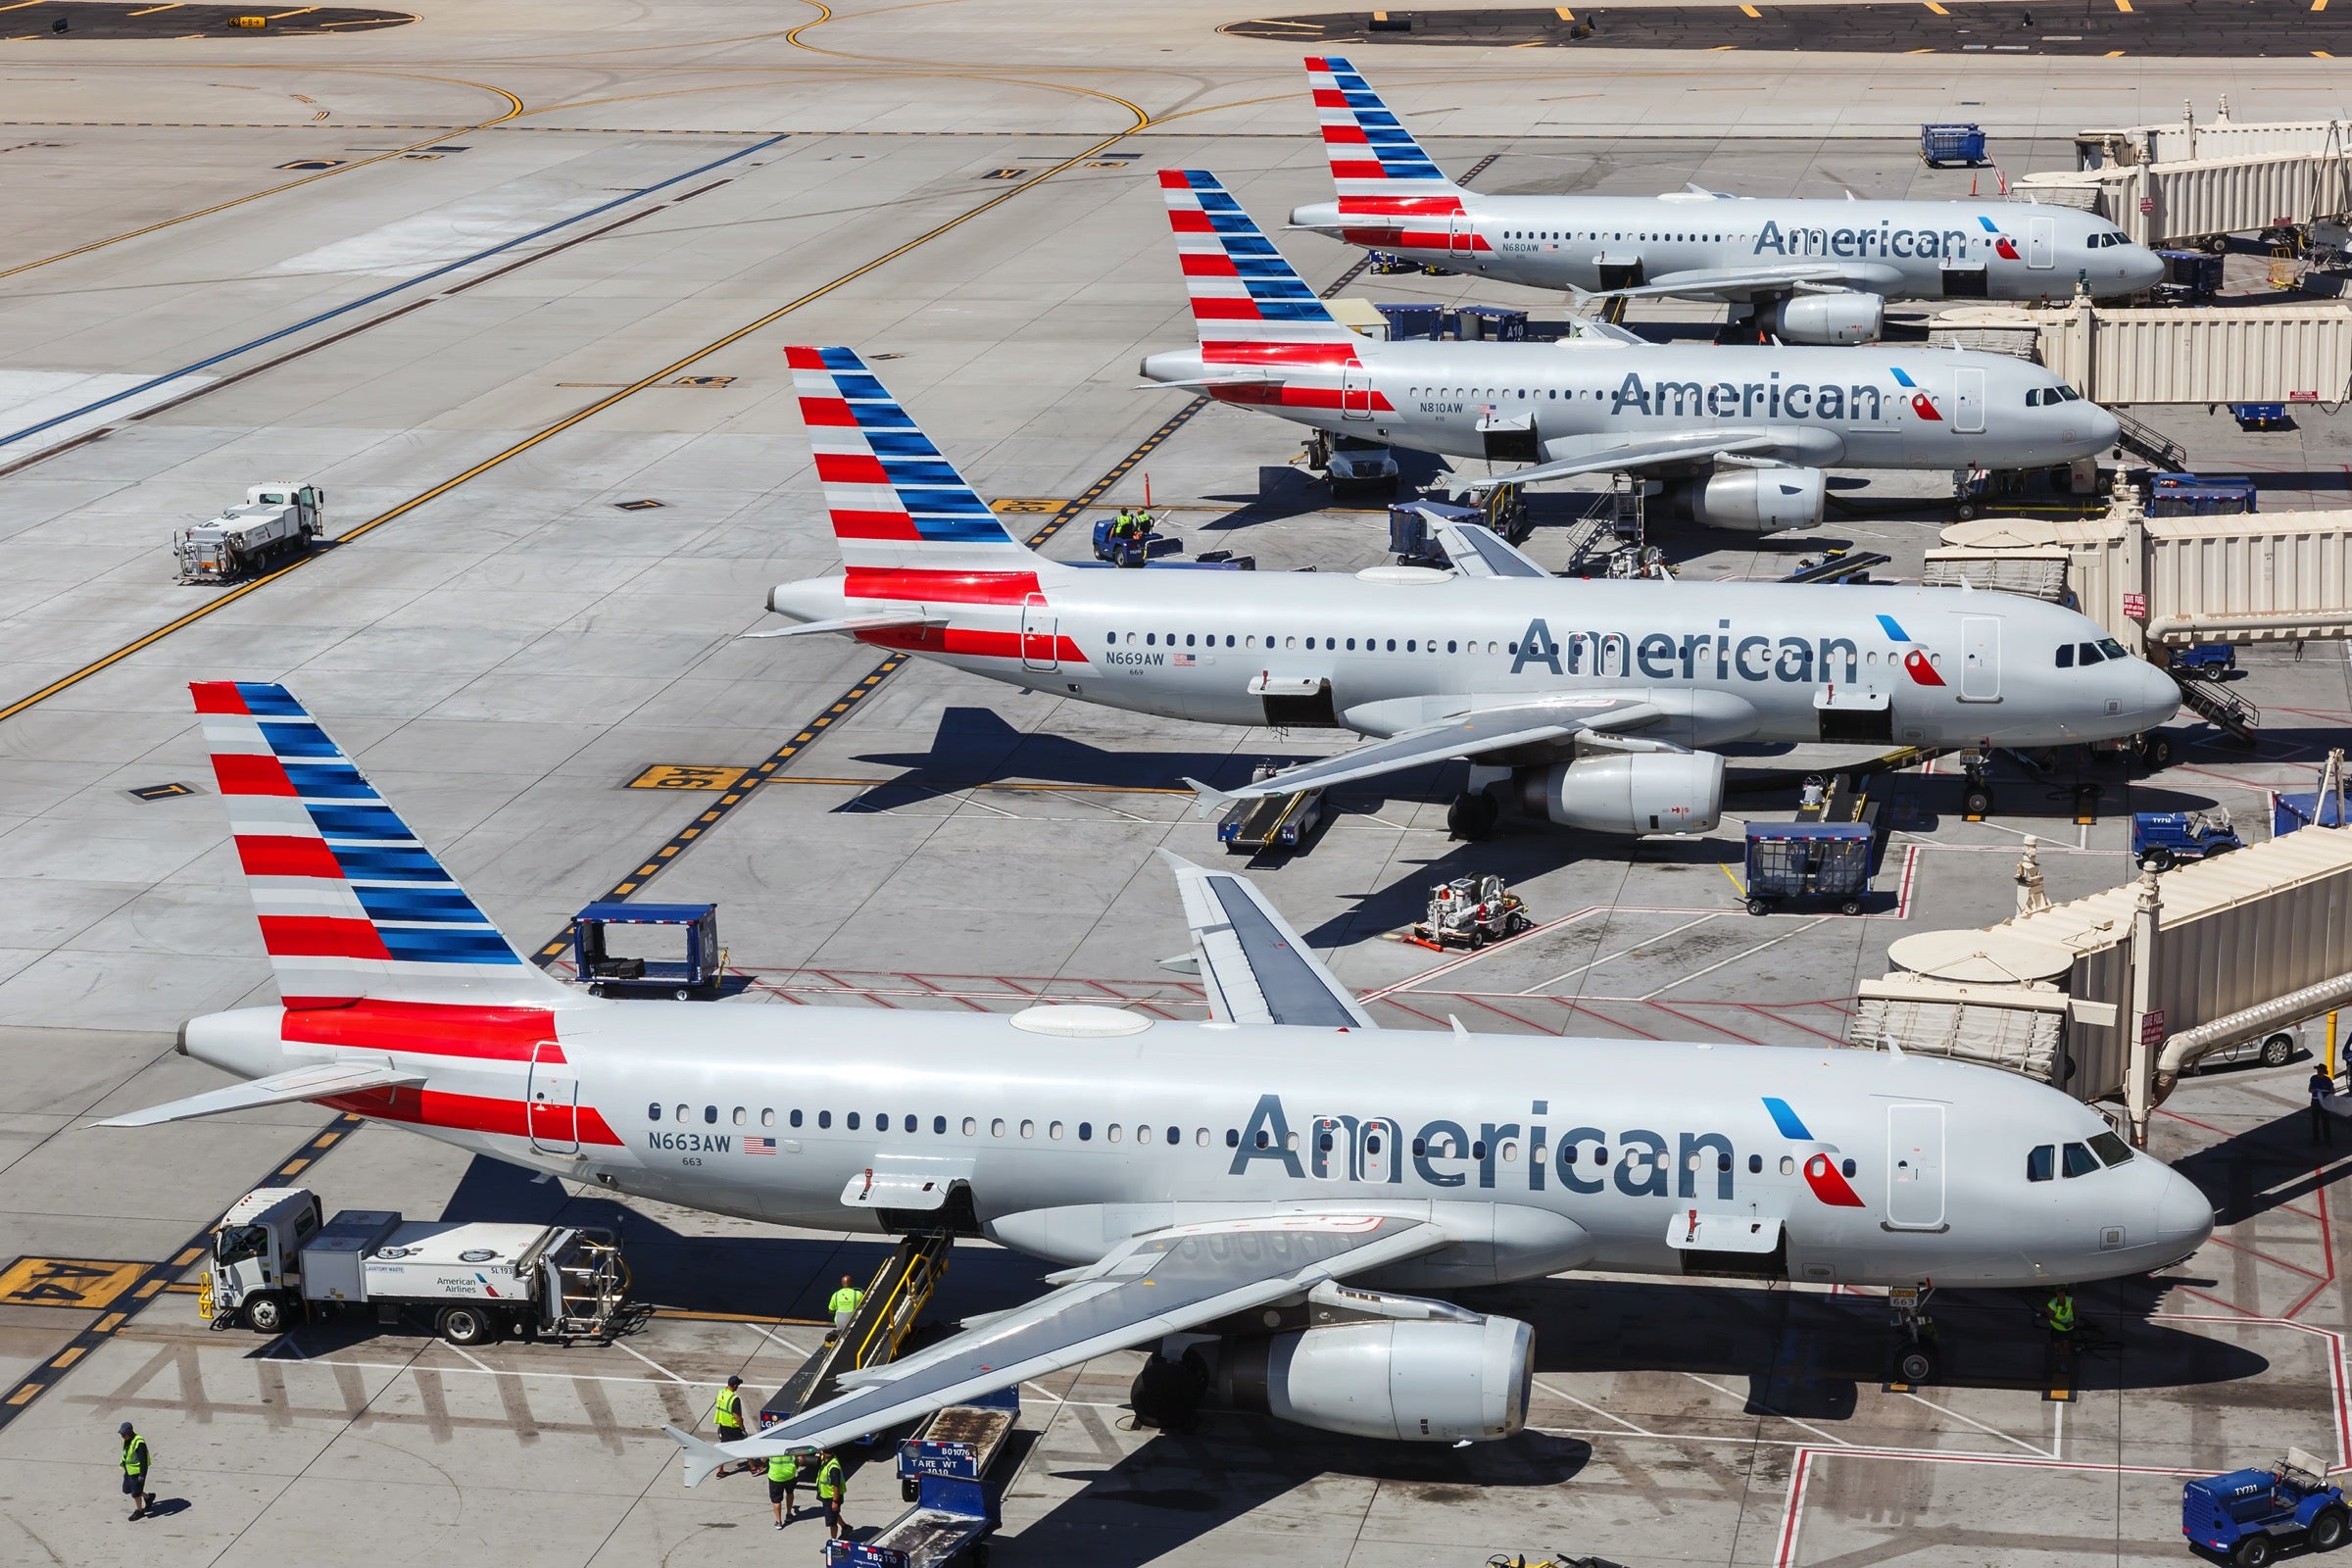 American Airlines planes at the gate in Phoenix airport